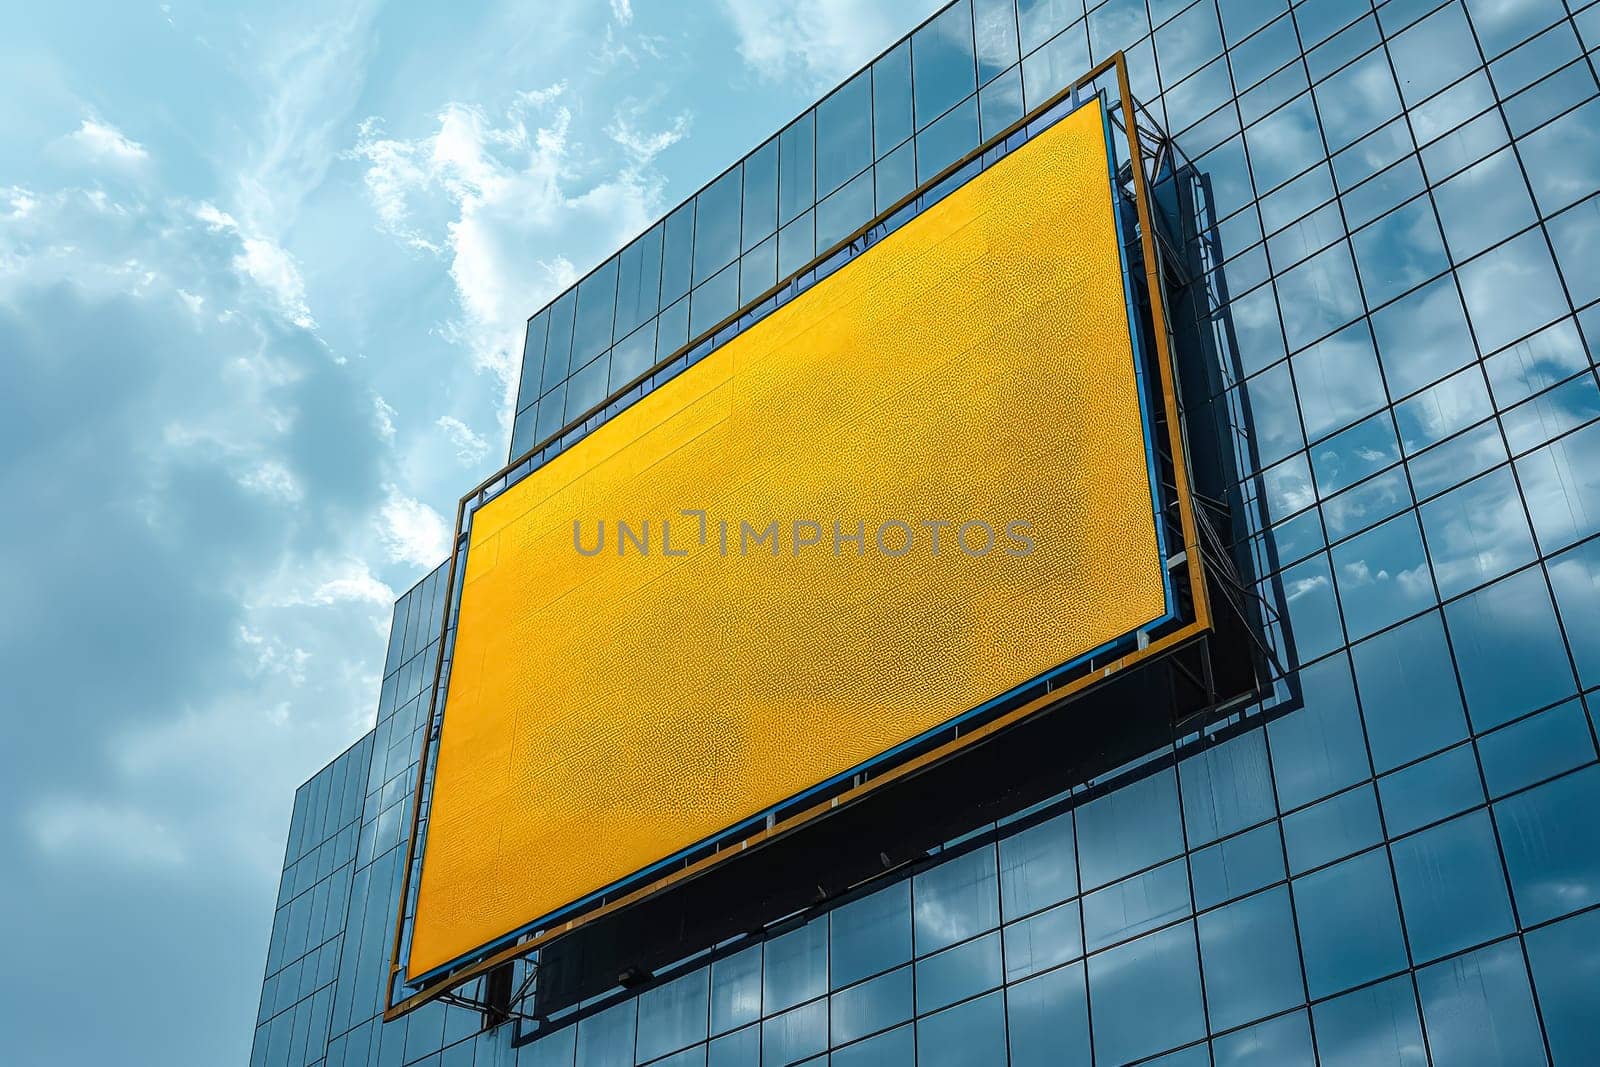 A large yellow sign is on a building in a city. The sign is blank, but it is bright and eye-catching. The building is surrounded by other tall buildings, creating a sense of urbanization and modernity